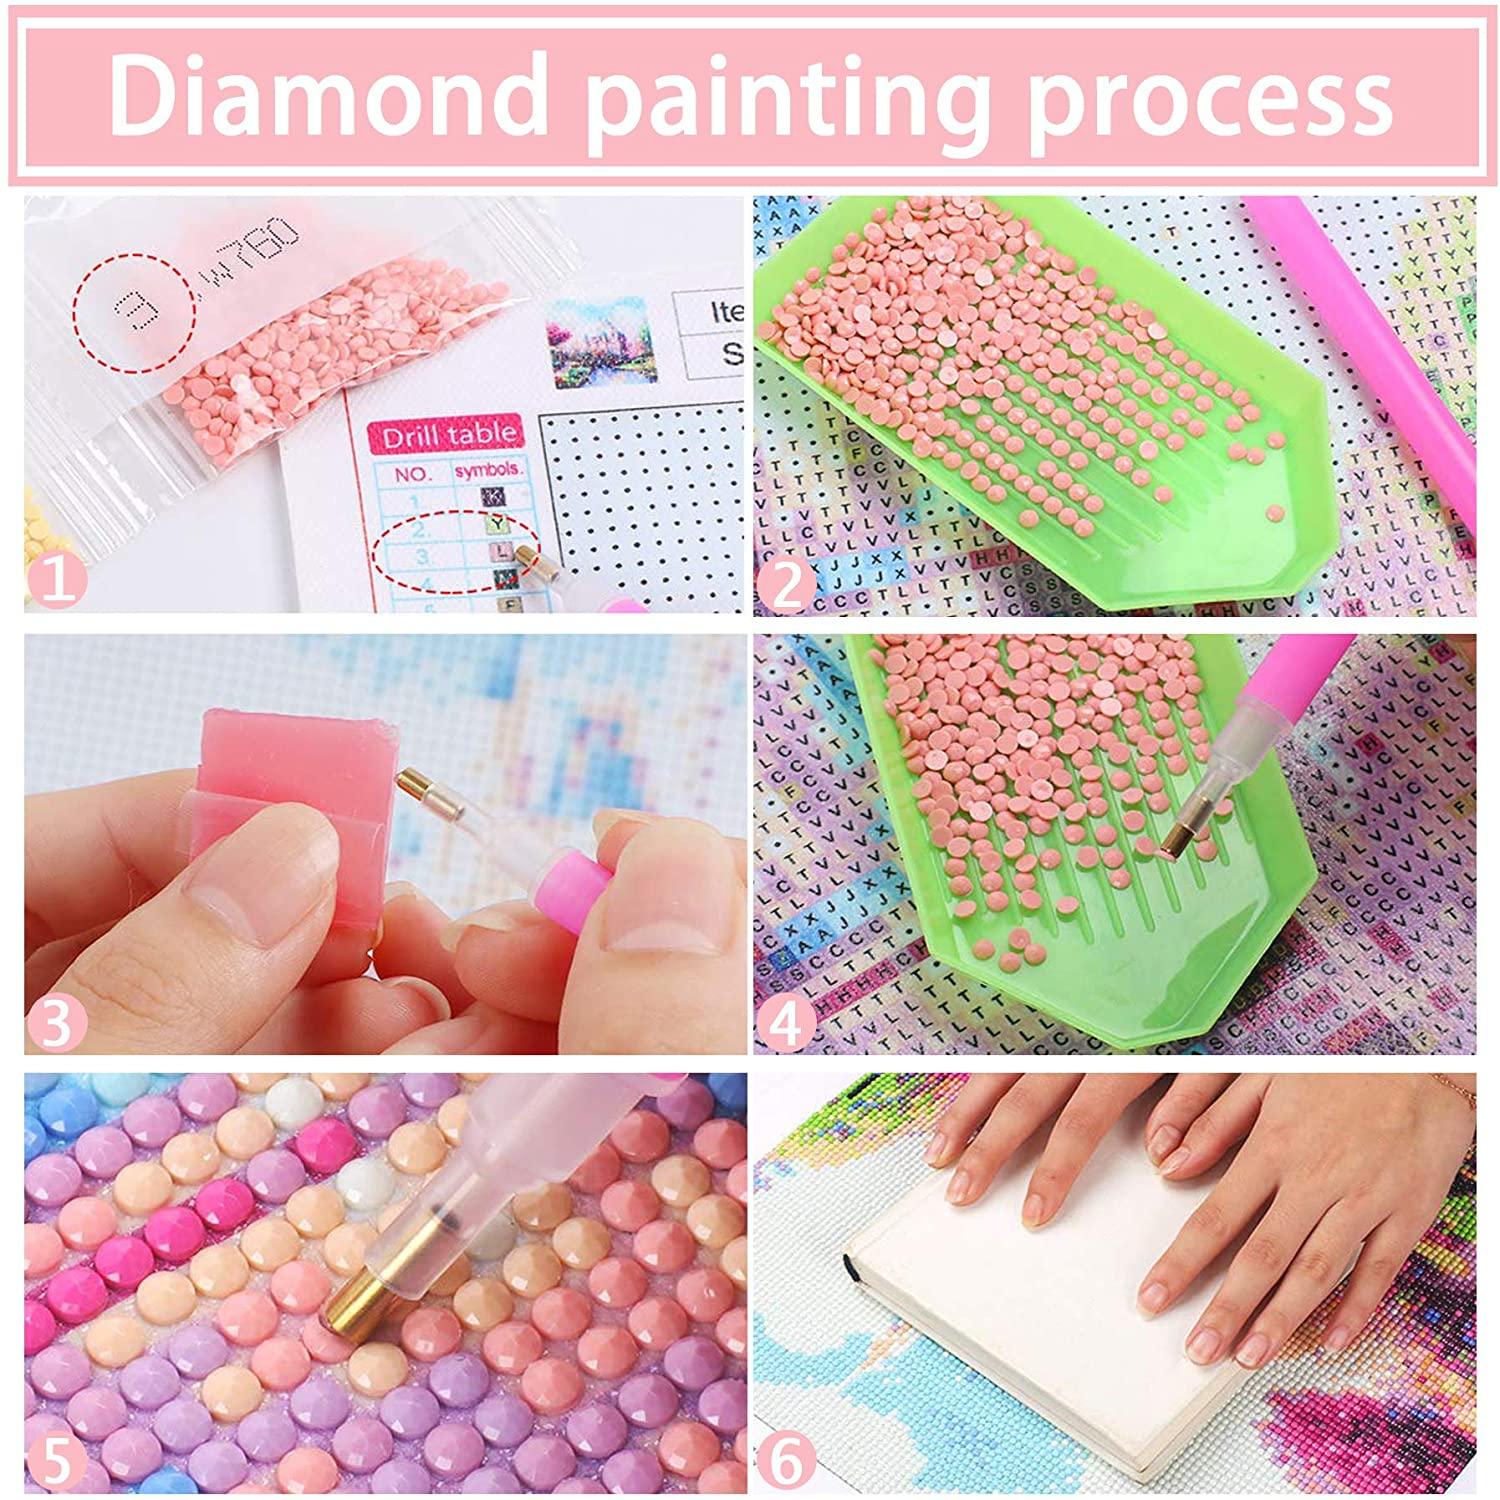 Bimkole 5D Diamond Painting Sunset Love Sunflower Full Drill by Number Kits DIY Rhinestone Pasted 12x16inch